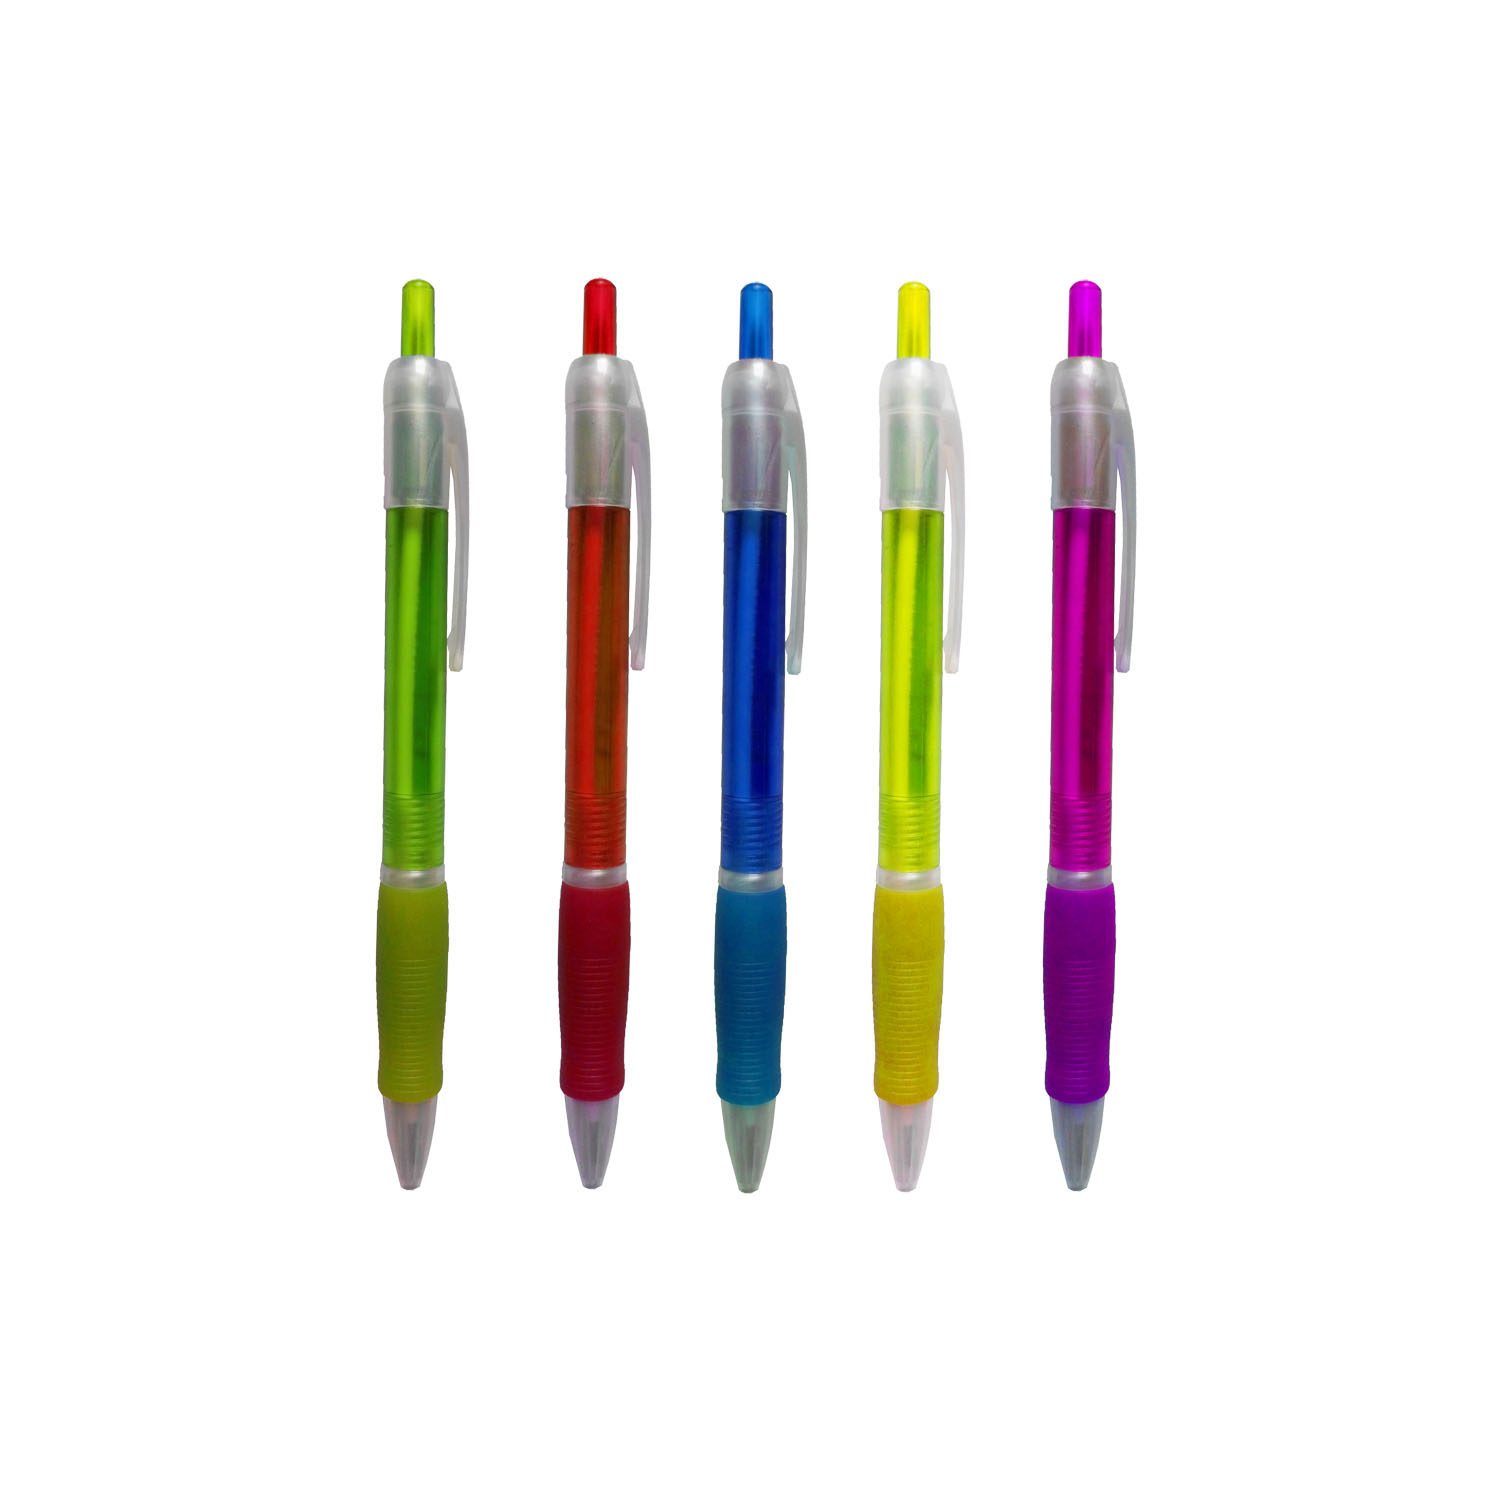 GL-AAA1119 Translucent Clickable Pen with Grip